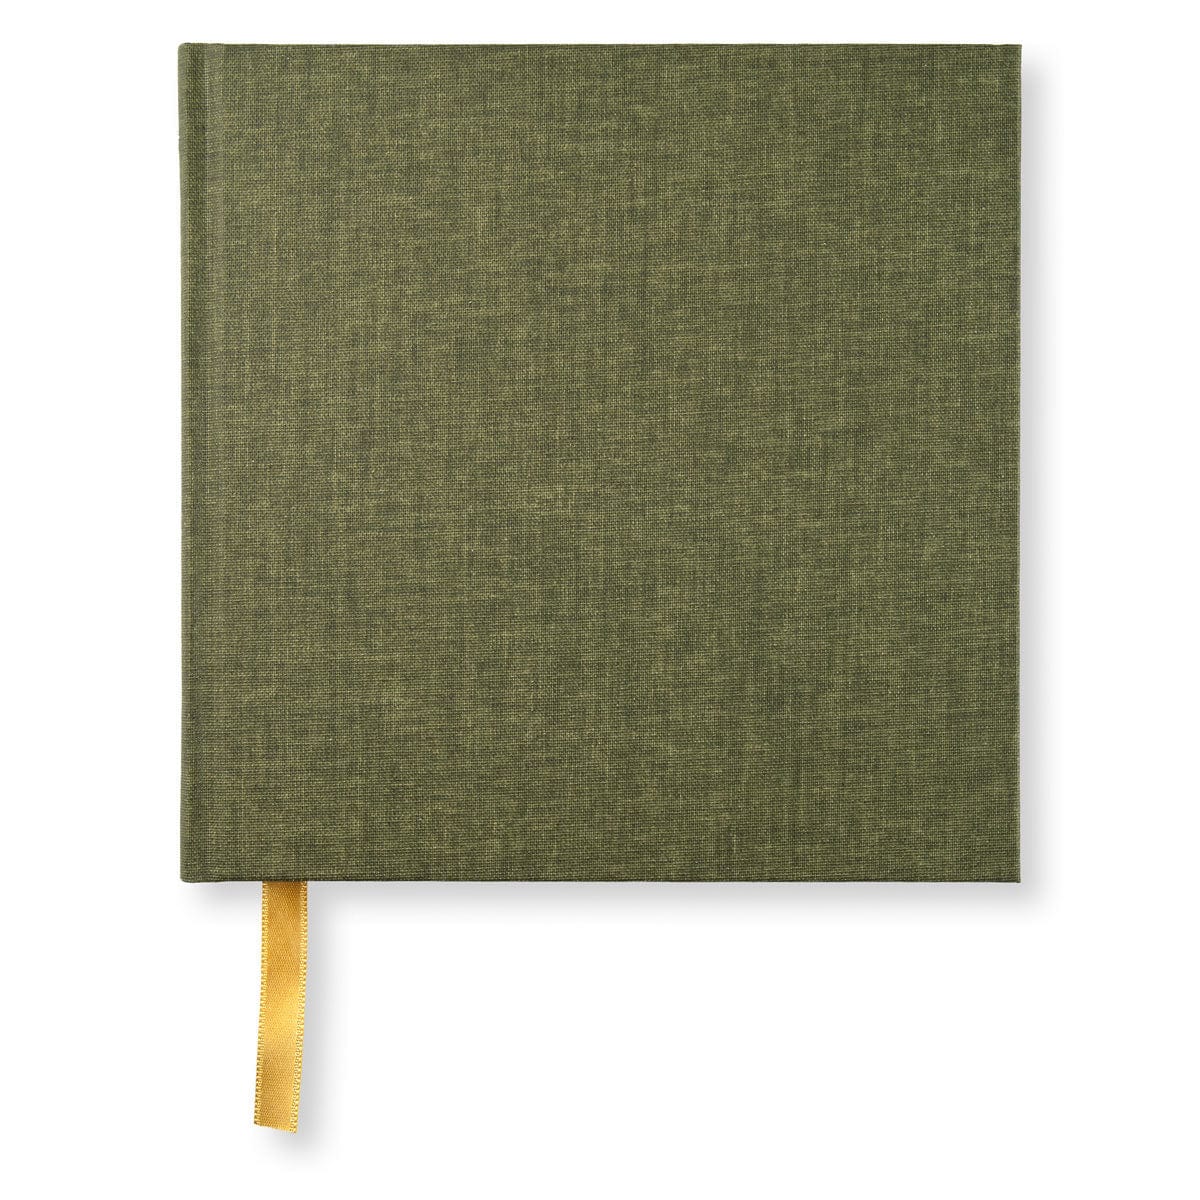 PaperStyle PS BLANK BOOK 185 x 185 Khaki Green